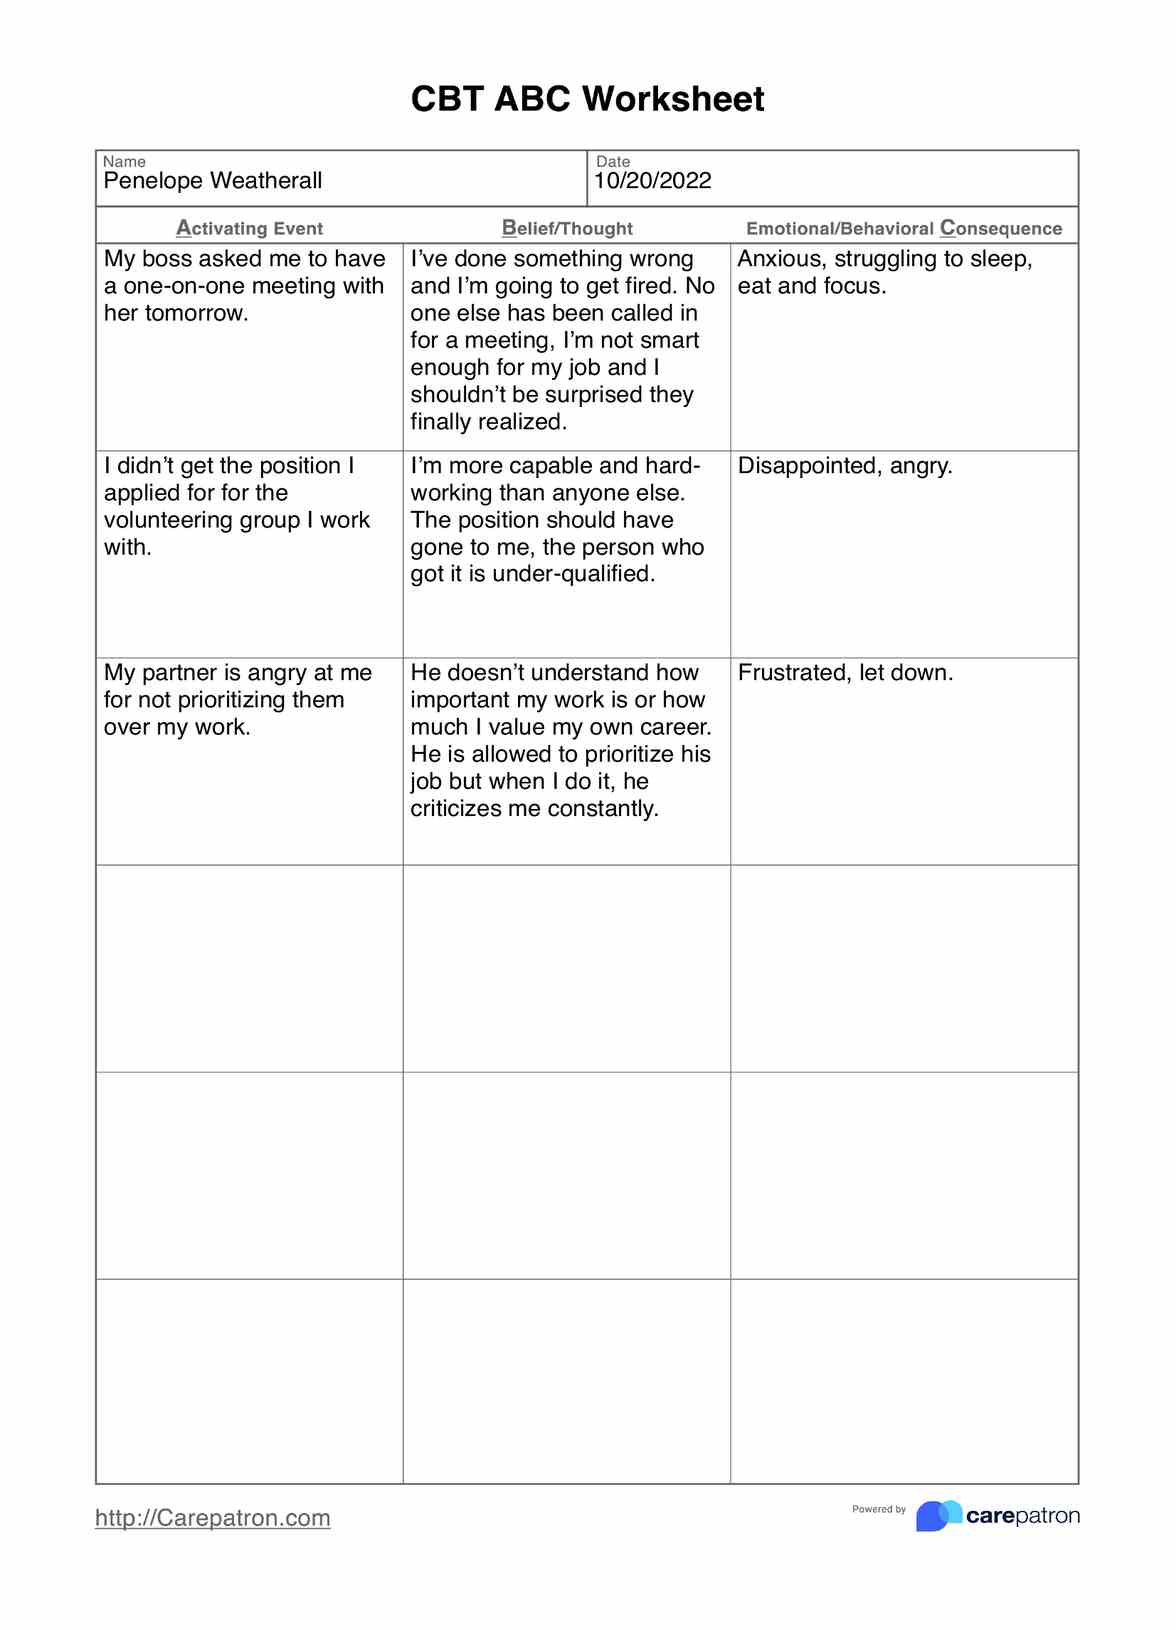 CBT ABC Worksheets PDF Example